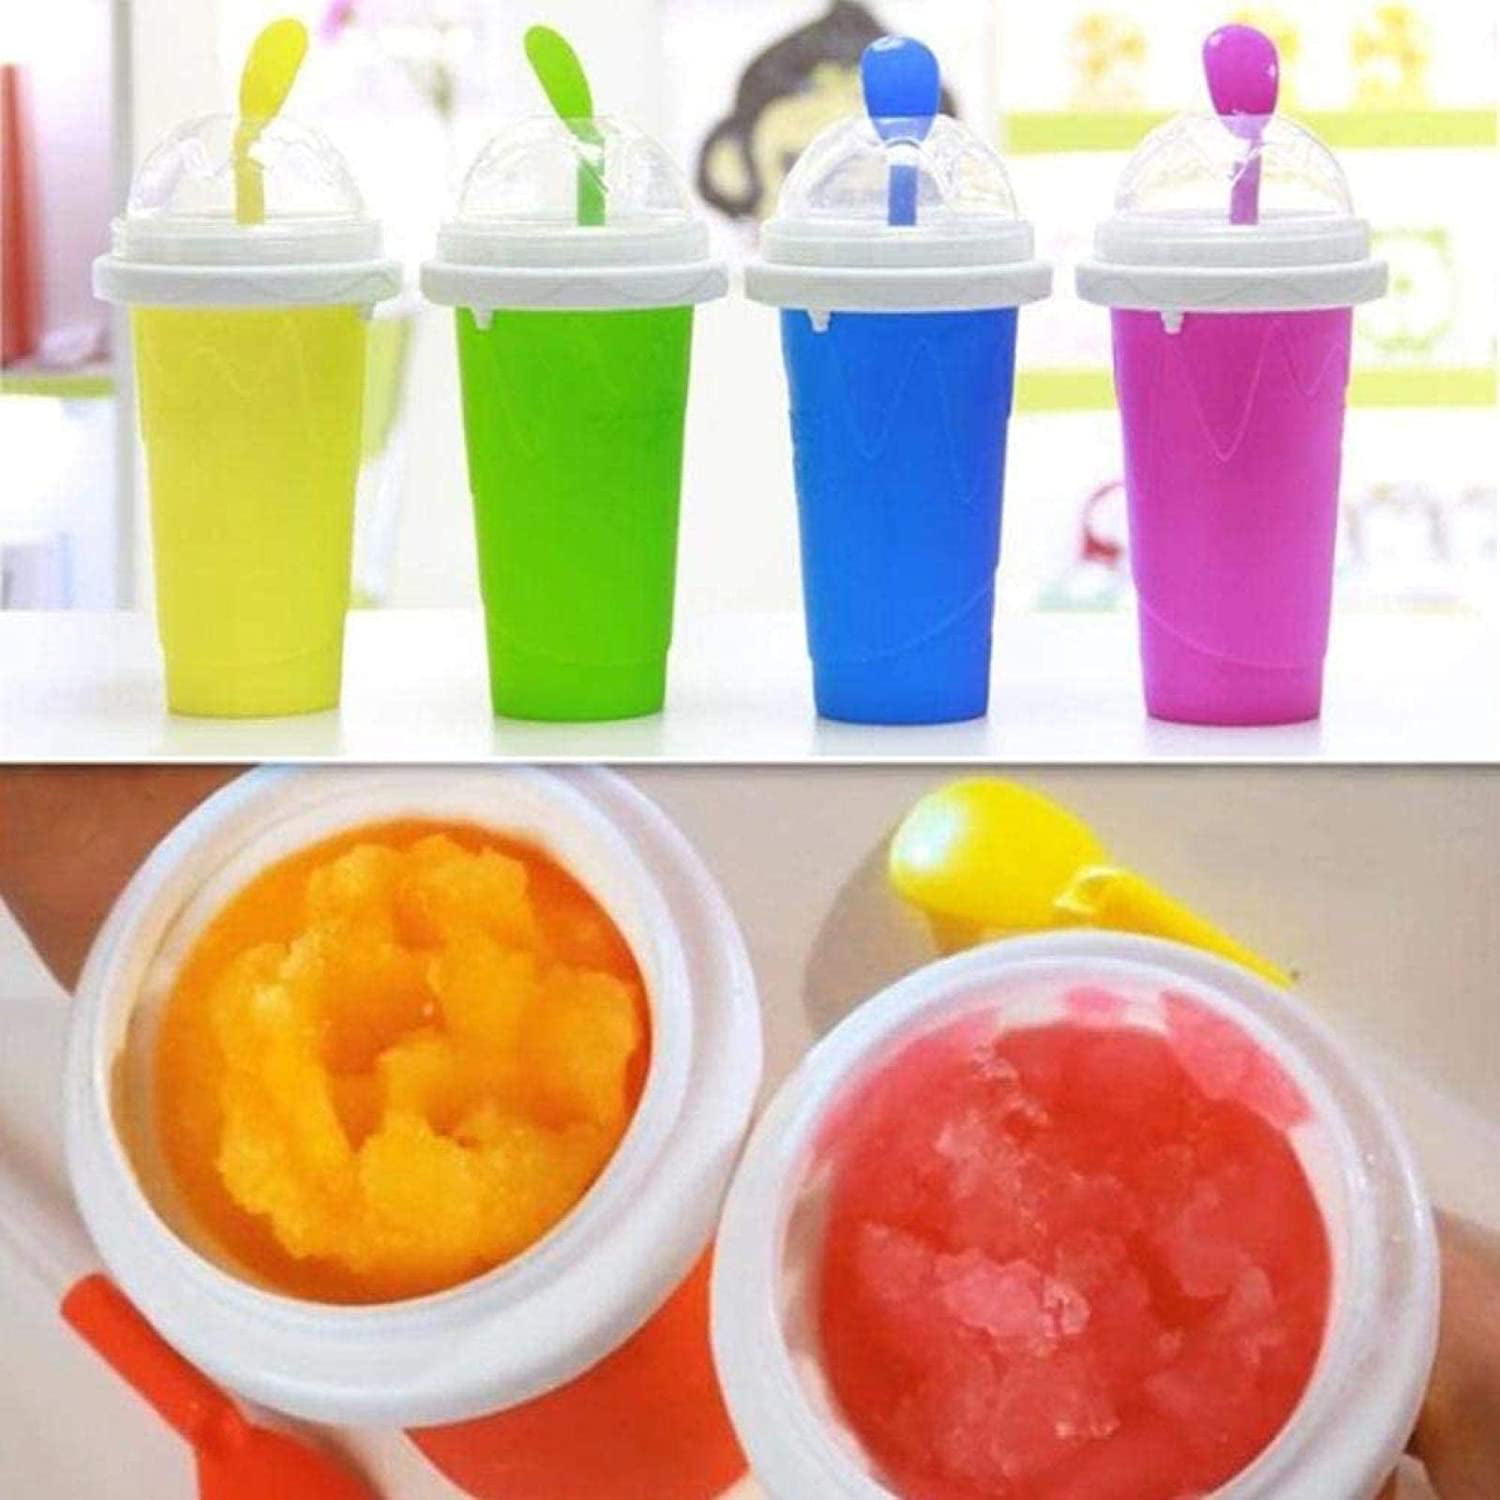 Hot Summer Cooler Smoothie Making Cup for Kids 4pc Squeeze Cup Slushy Maker DIY Slushy Maker Ice Cup Portable Travel Ice Cup Double Layer Silica Cup Pinch Cup Magic Slushy Maker